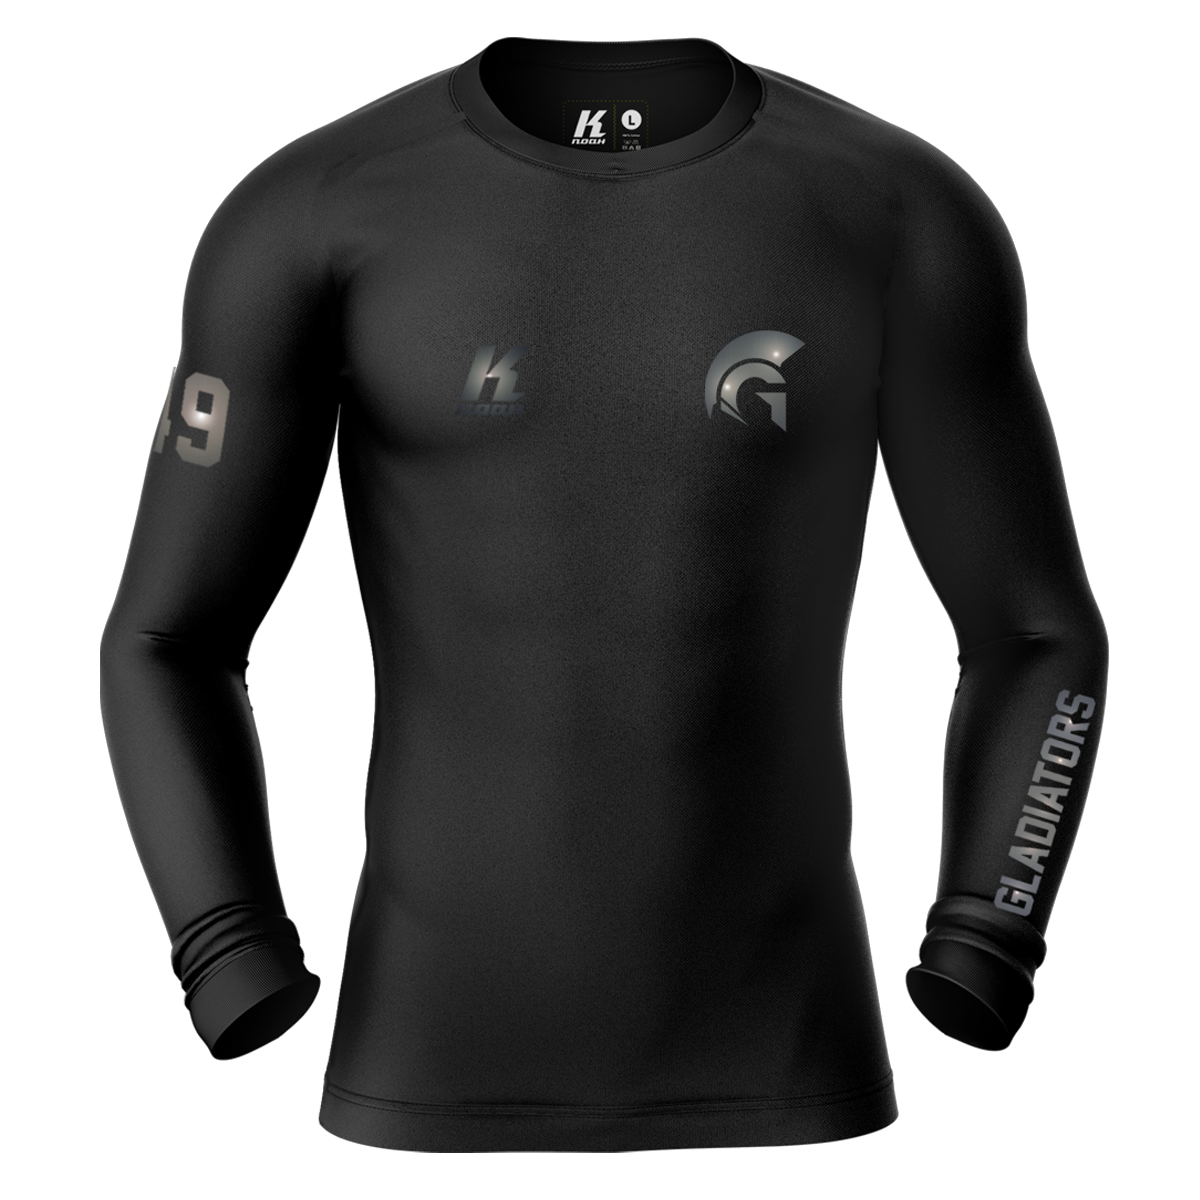 Gladiators "Blackline" K.Tech Compression Longsleeve Shirt with Playernumber/Initials